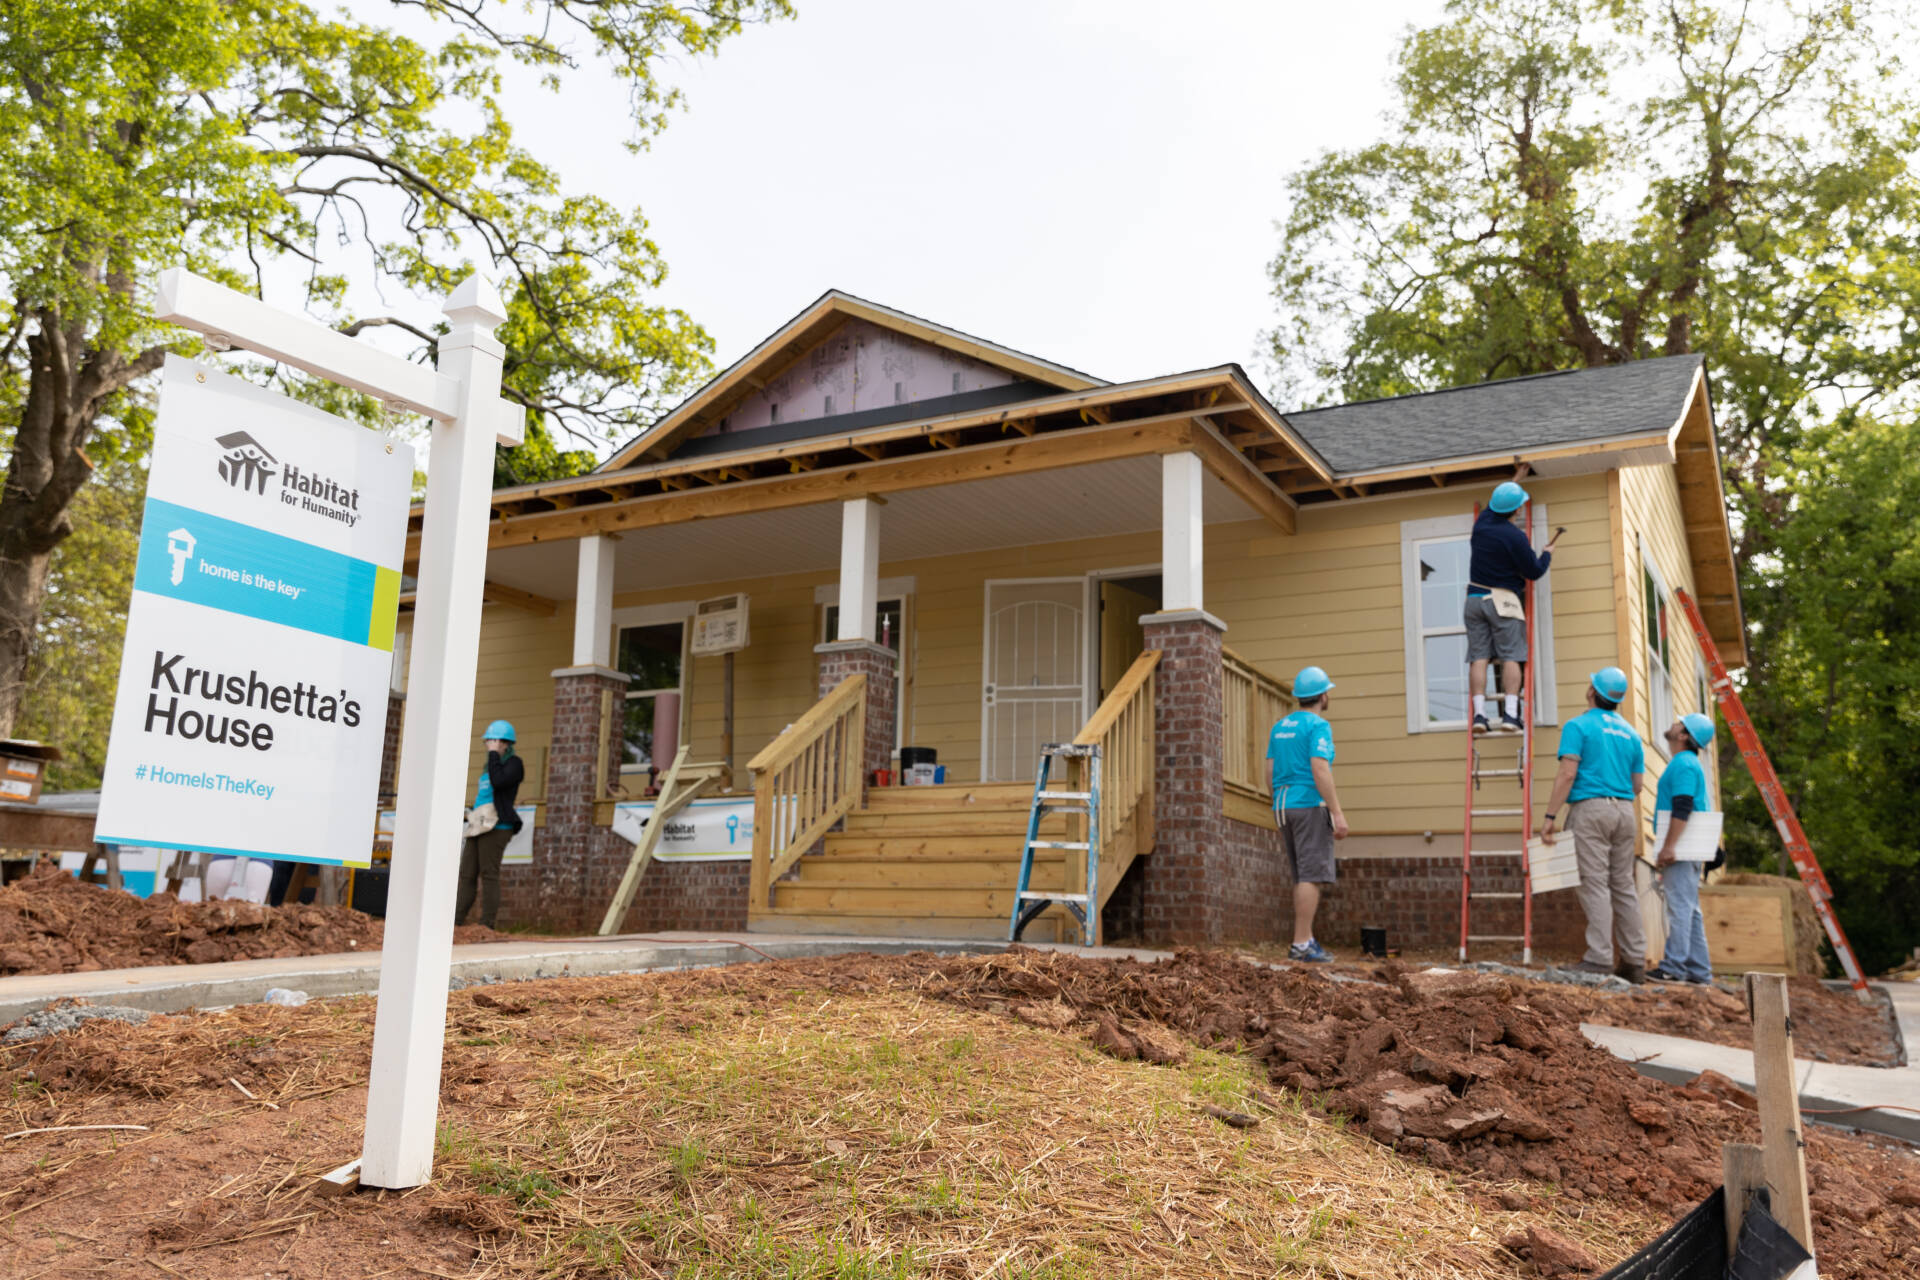 USGA-19-AK-101-02423.jpg
ATLANTA, GEORGIA (4/17/2019) - Volunteers from Nest and Google join Krushetta Holt and her family to work on her home as part of the 2019 Home Is The Key Campaign.